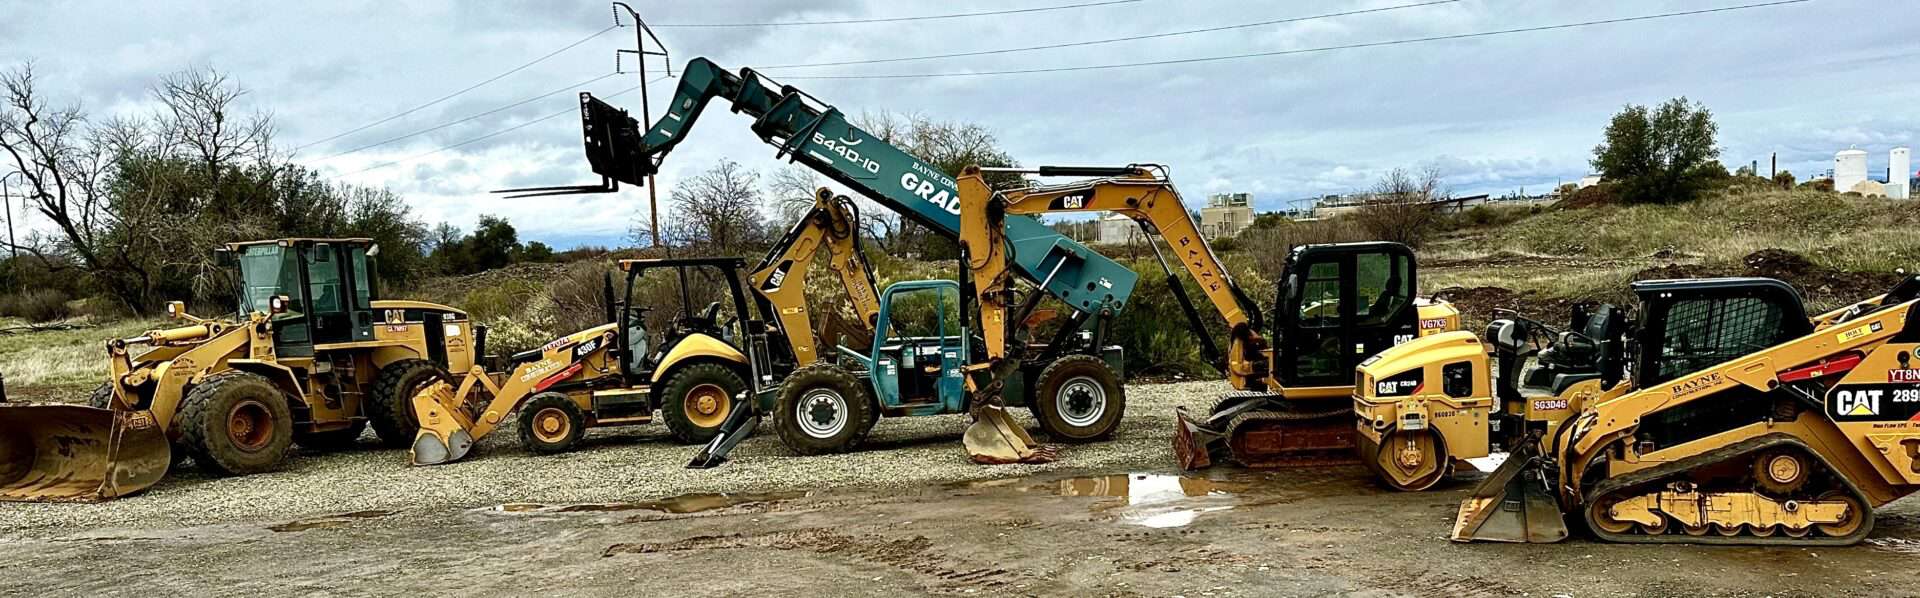 Heavy equipment for construction work